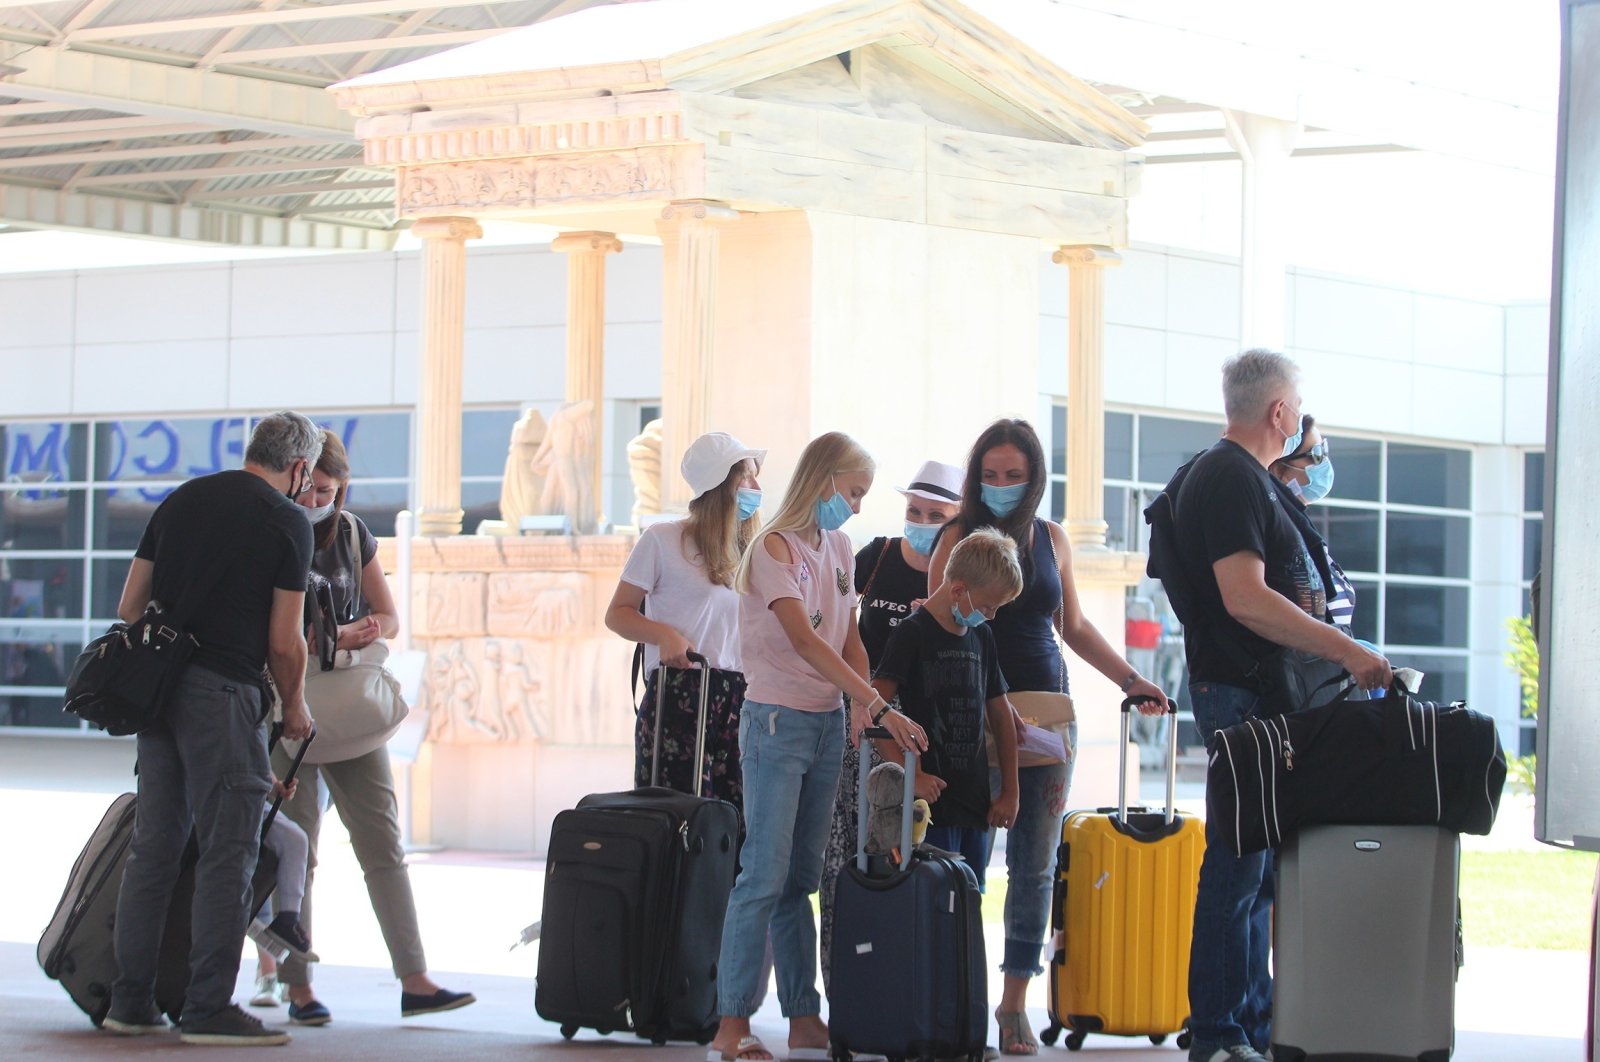 Russian tourists are seen at the Antalya Airport in Antalya, southern Turkey, Aug. 10, 2020. (IHA Photo)